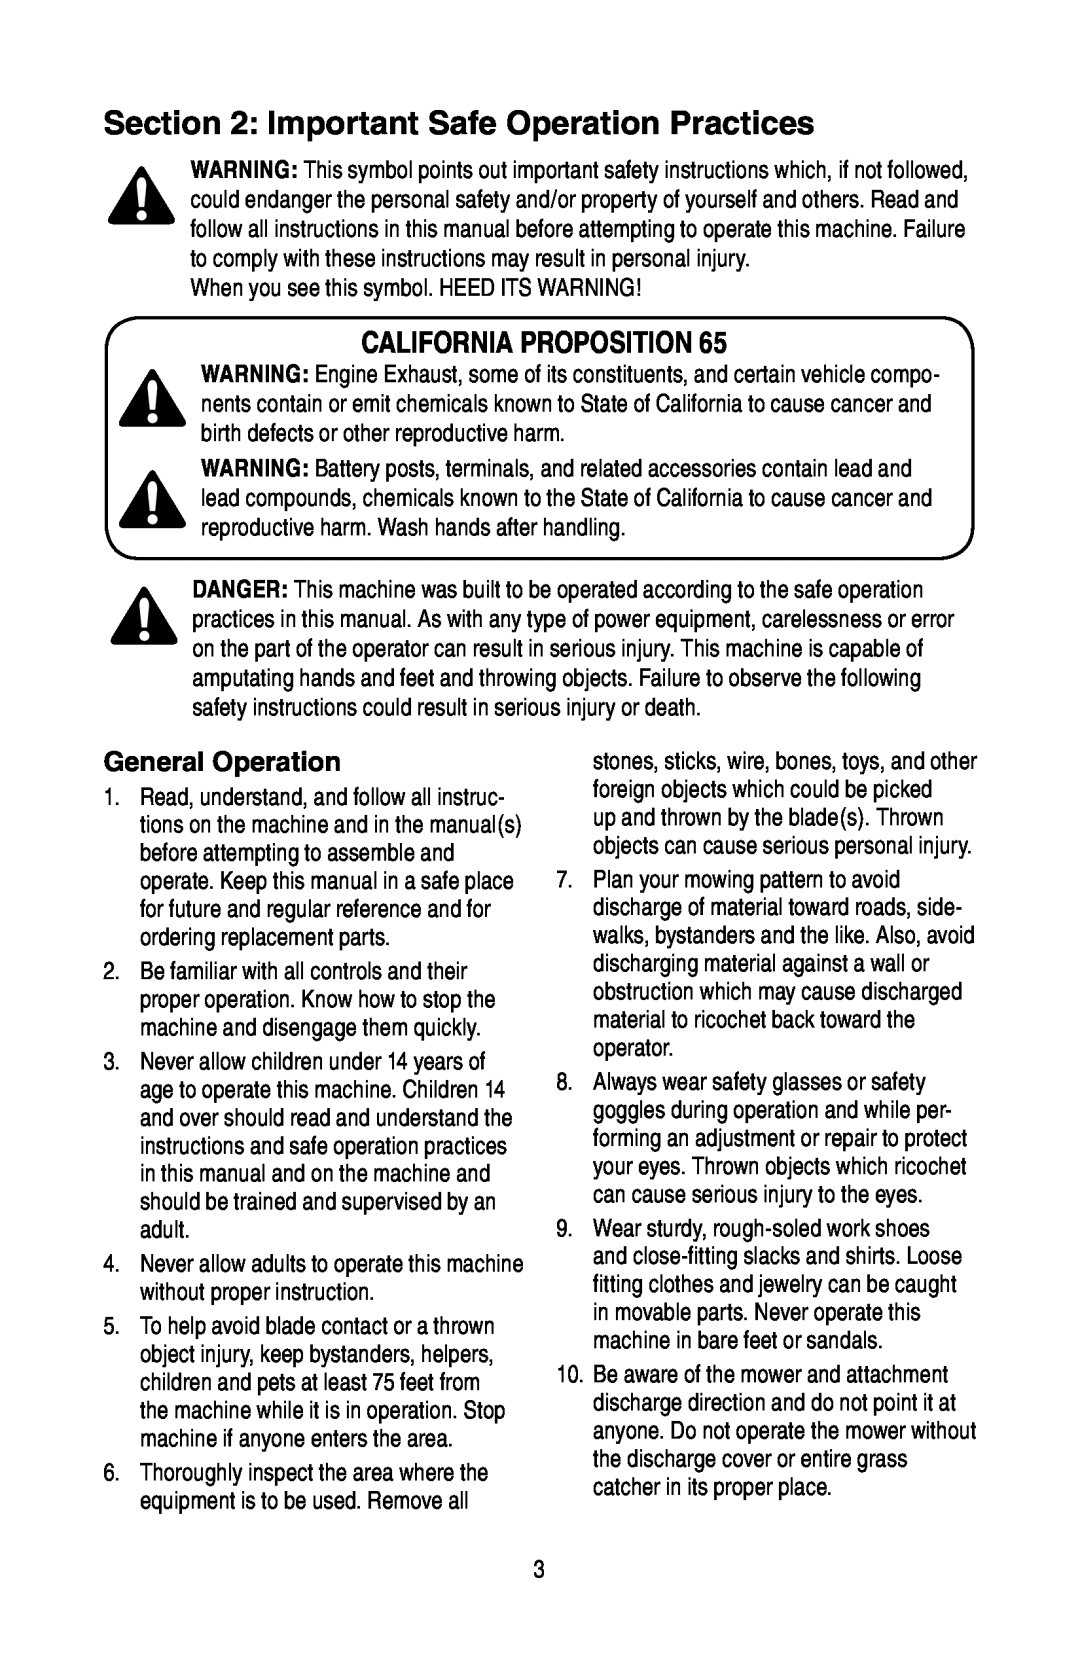 Cub Cadet GT 3200 warranty Important Safe Operation Practices, California Proposition, General Operation 